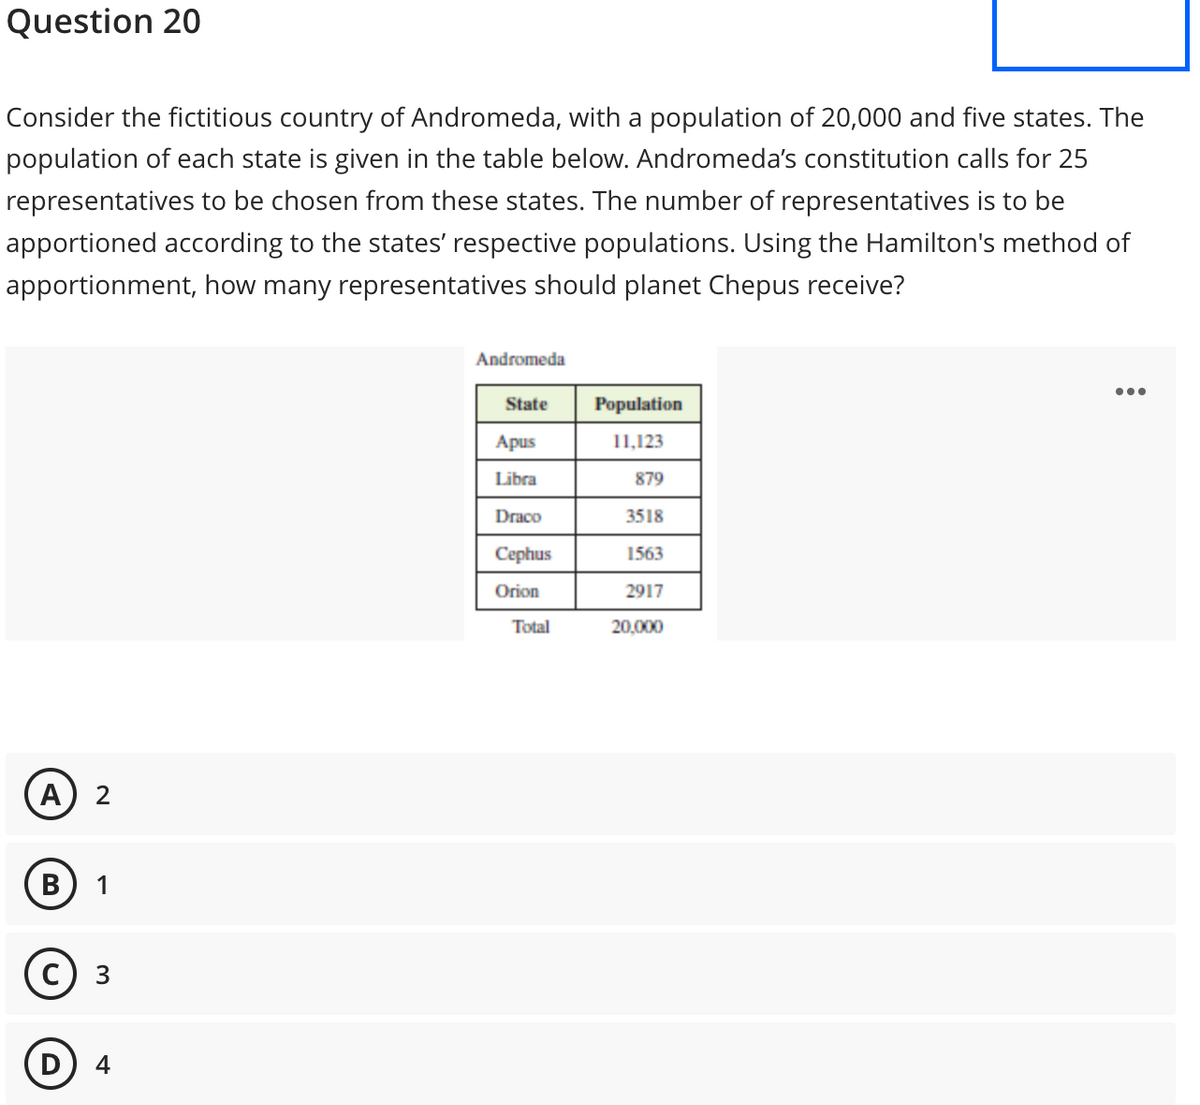 Question 20
Consider the fictitious country of Andromeda, with a population of 20,000 and five states. The
population of each state is given in the table below. Andromeda's constitution calls for 25
representatives to be chosen from these states. The number of representatives is to be
apportioned according to the states' respective populations. Using the Hamilton's method of
apportionment, how many representatives should planet Chepus receive?
A) 2
B 1
3
D 4
Andromeda
State
Apus
Libra
Draco
Cephus
Orion
Total
Population
11,123
879
3518
1563
2917
20,000
: